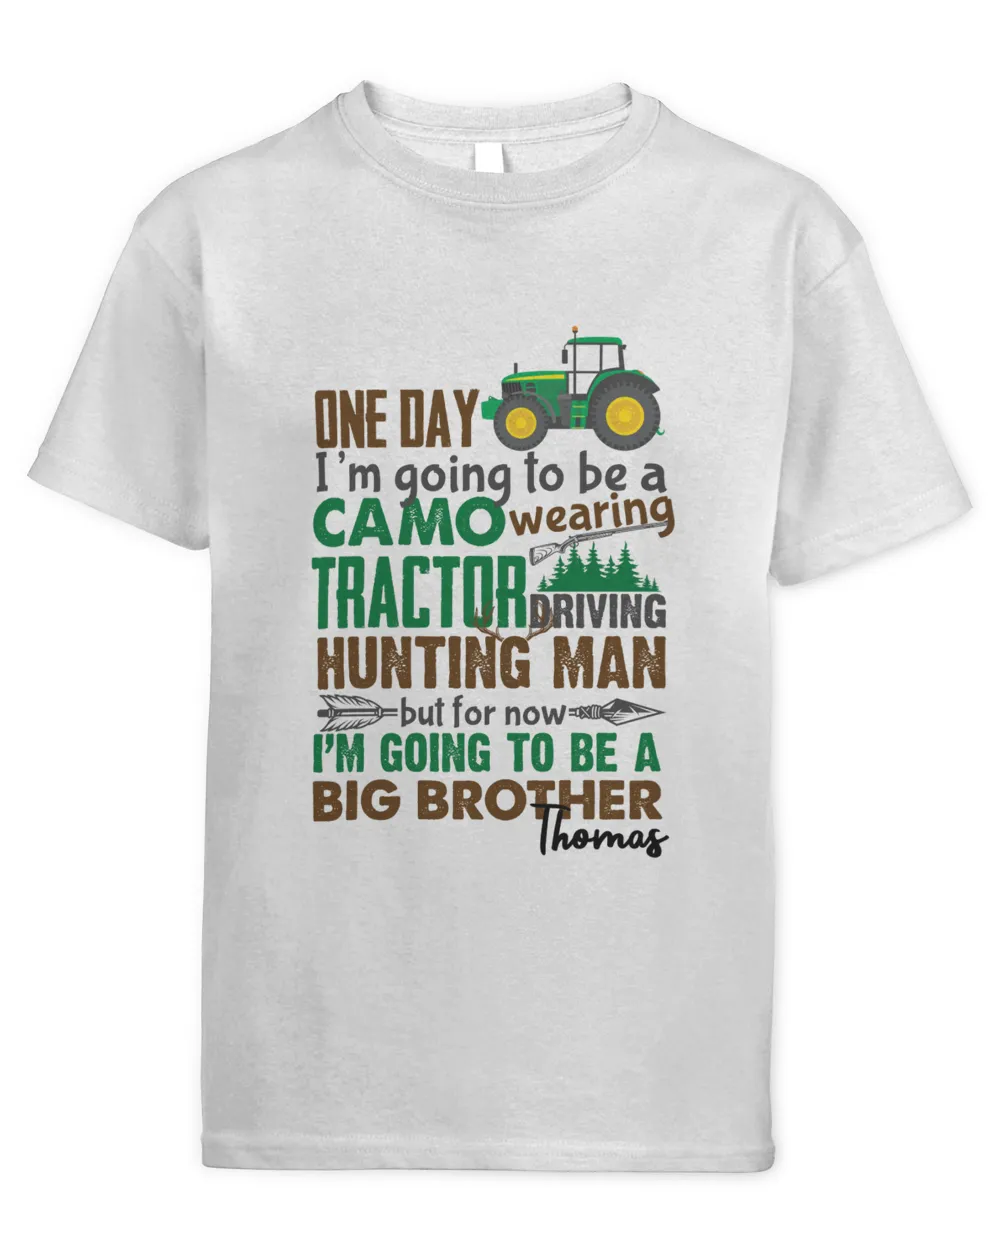 RD Big Brother Shirt One Day Camo wearing Tractor driving Hunting man but for now I_m going to be a big brother  Pregnancy announcement